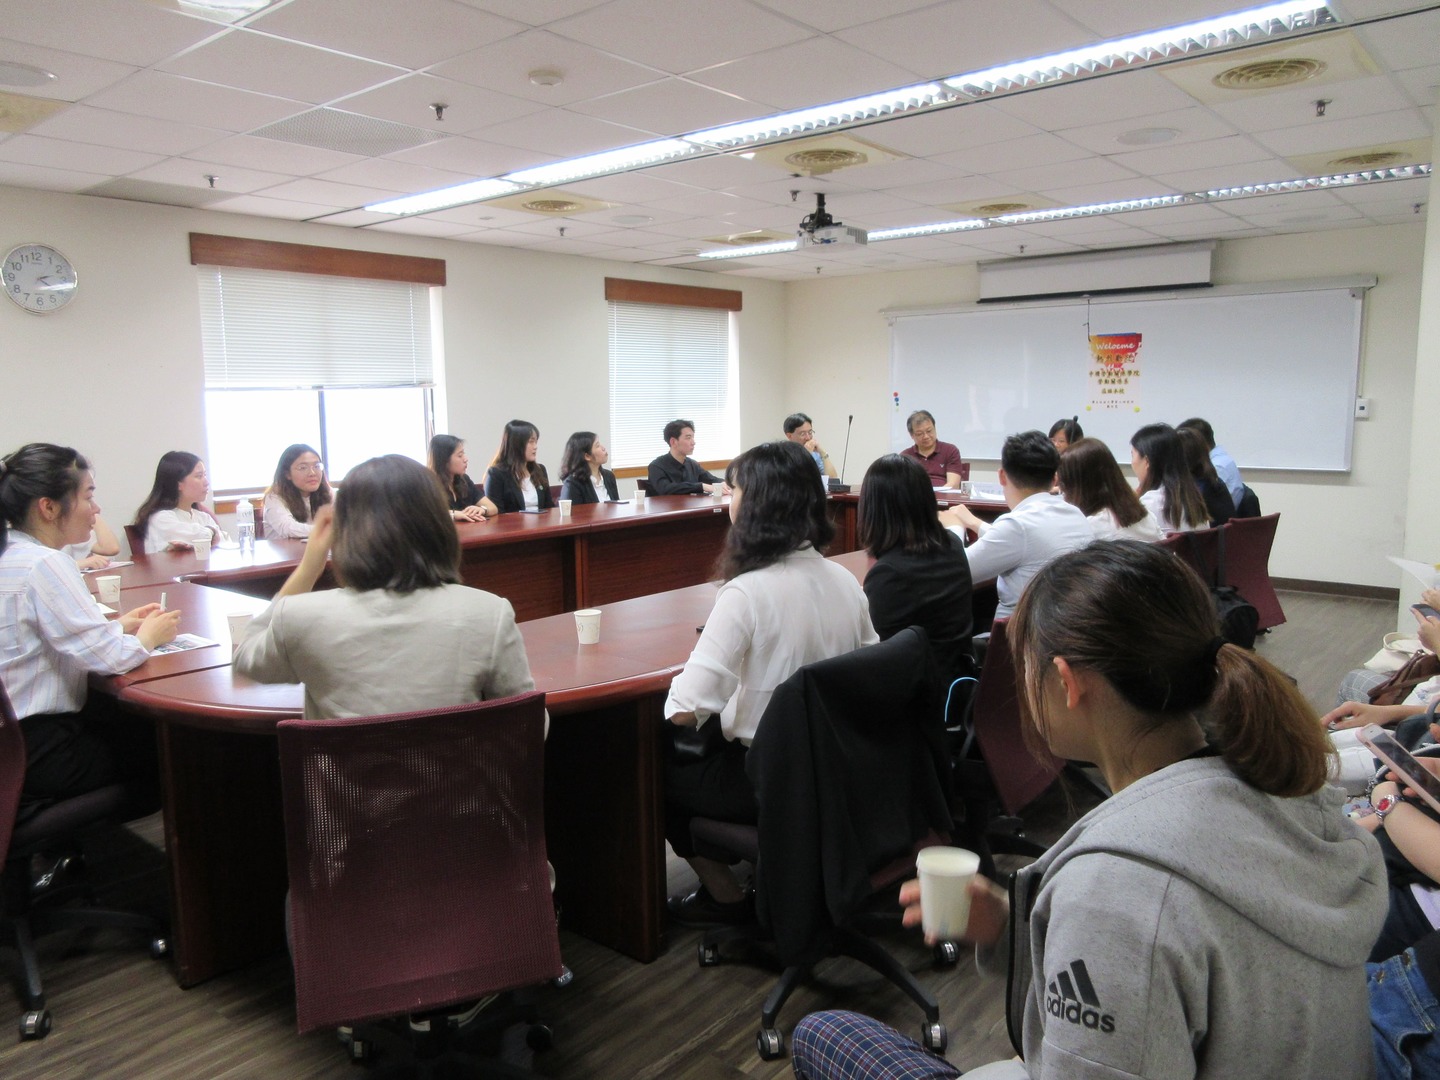 The visiting of China University of Labor Relations (2019.04.23)